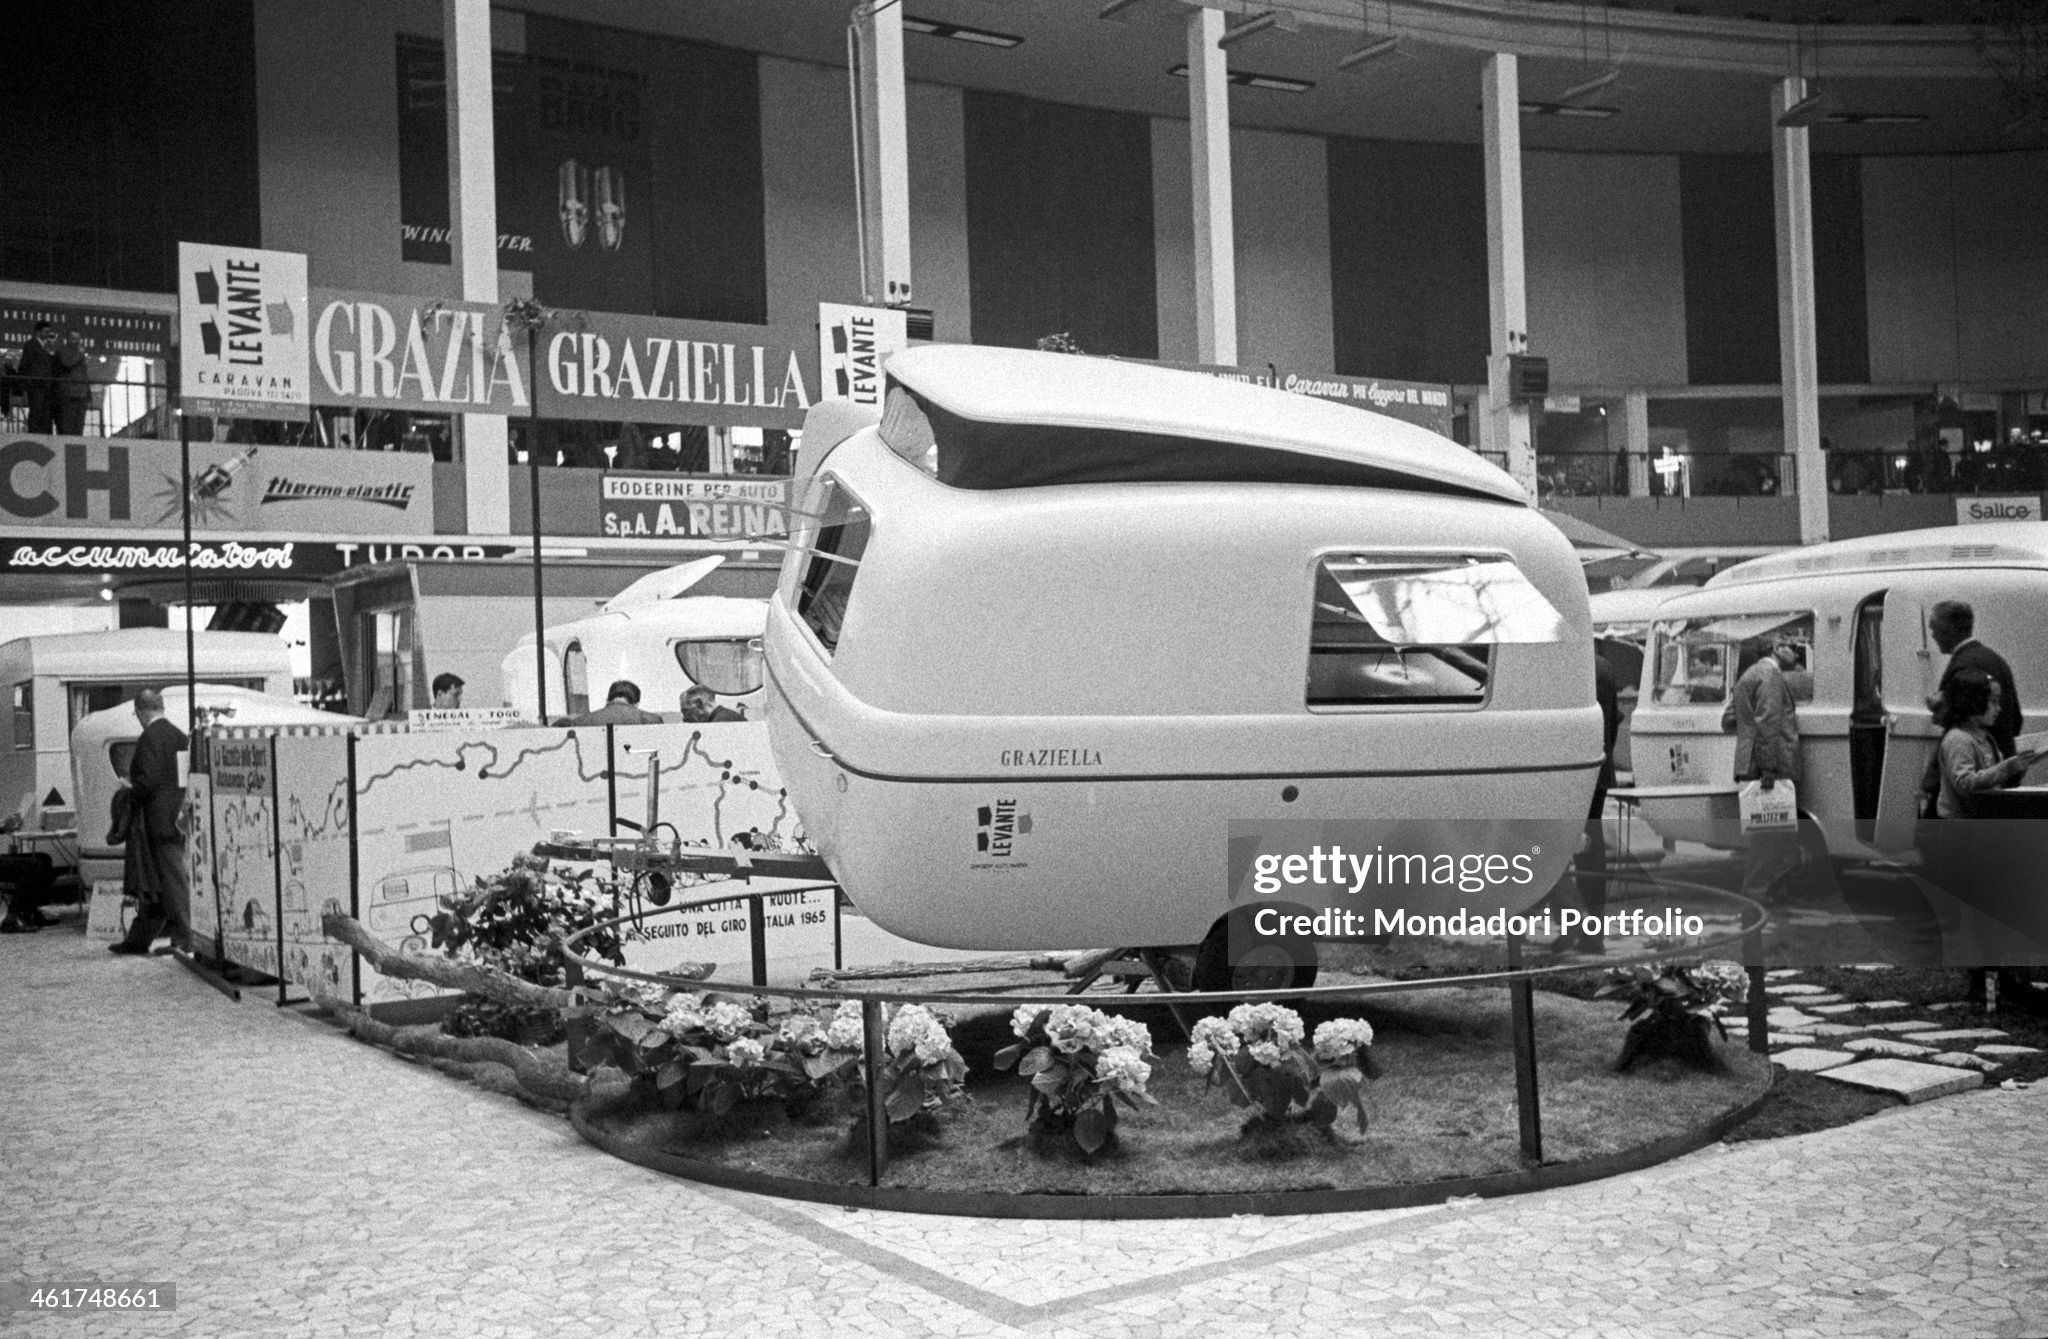 A Levante Graziella 300, a small but effective caravan named after the newspaper Grazia, is shown on the rotating platform into a stand within the Fair of Milan in April 1963.